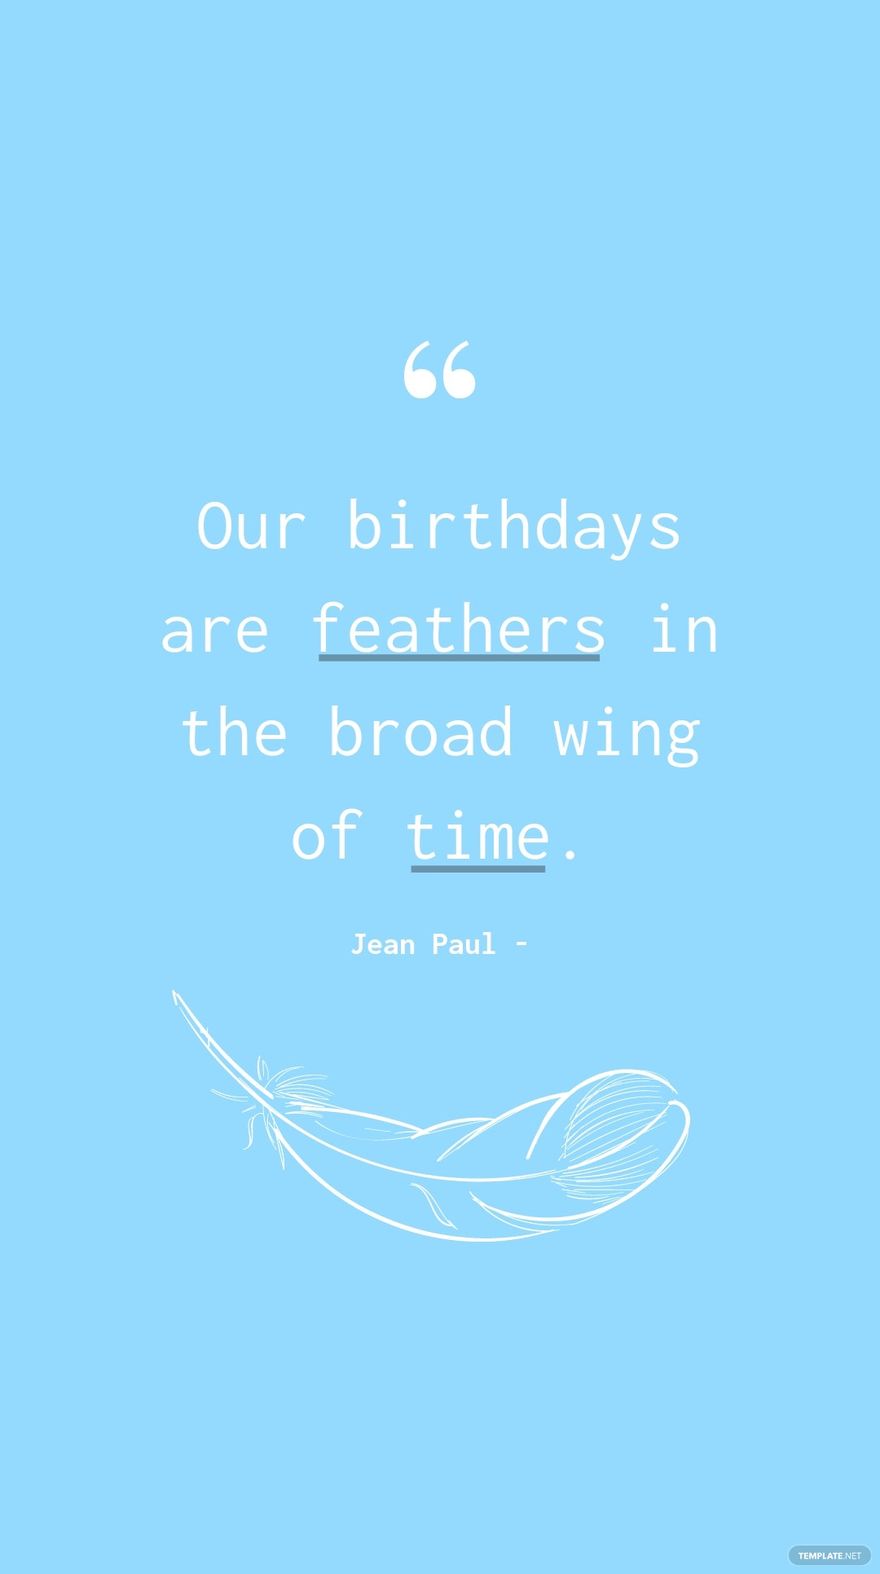 Jean Paul - Our birthdays are feathers in the broad wing of time. in JPG